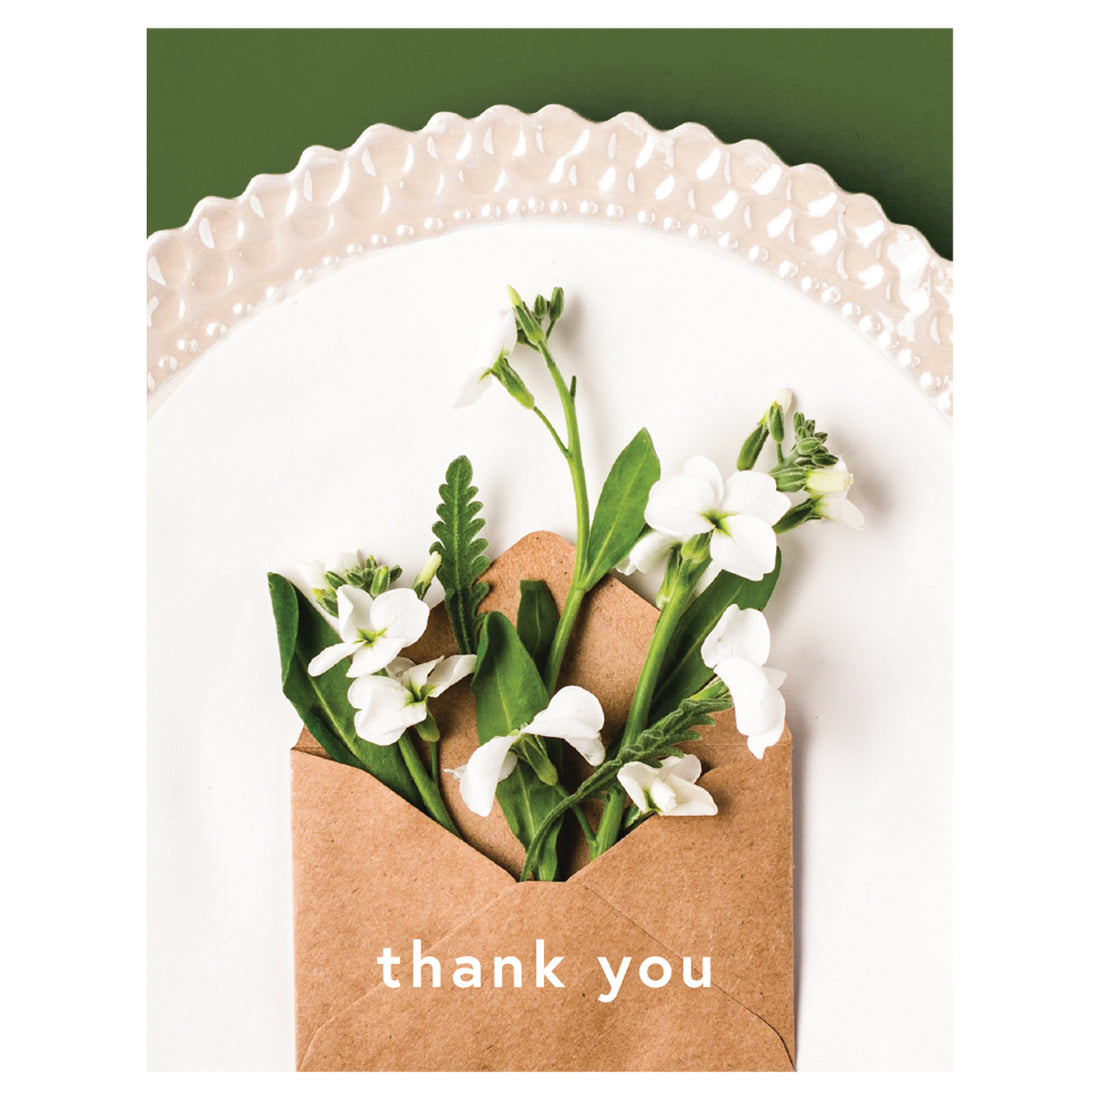 A photo of an open tan kraft paper envelope with delicate white blooms sprouting from it, resting on a white plate on a green table, with &quot;thank you&quot; printed in white on the envelope.